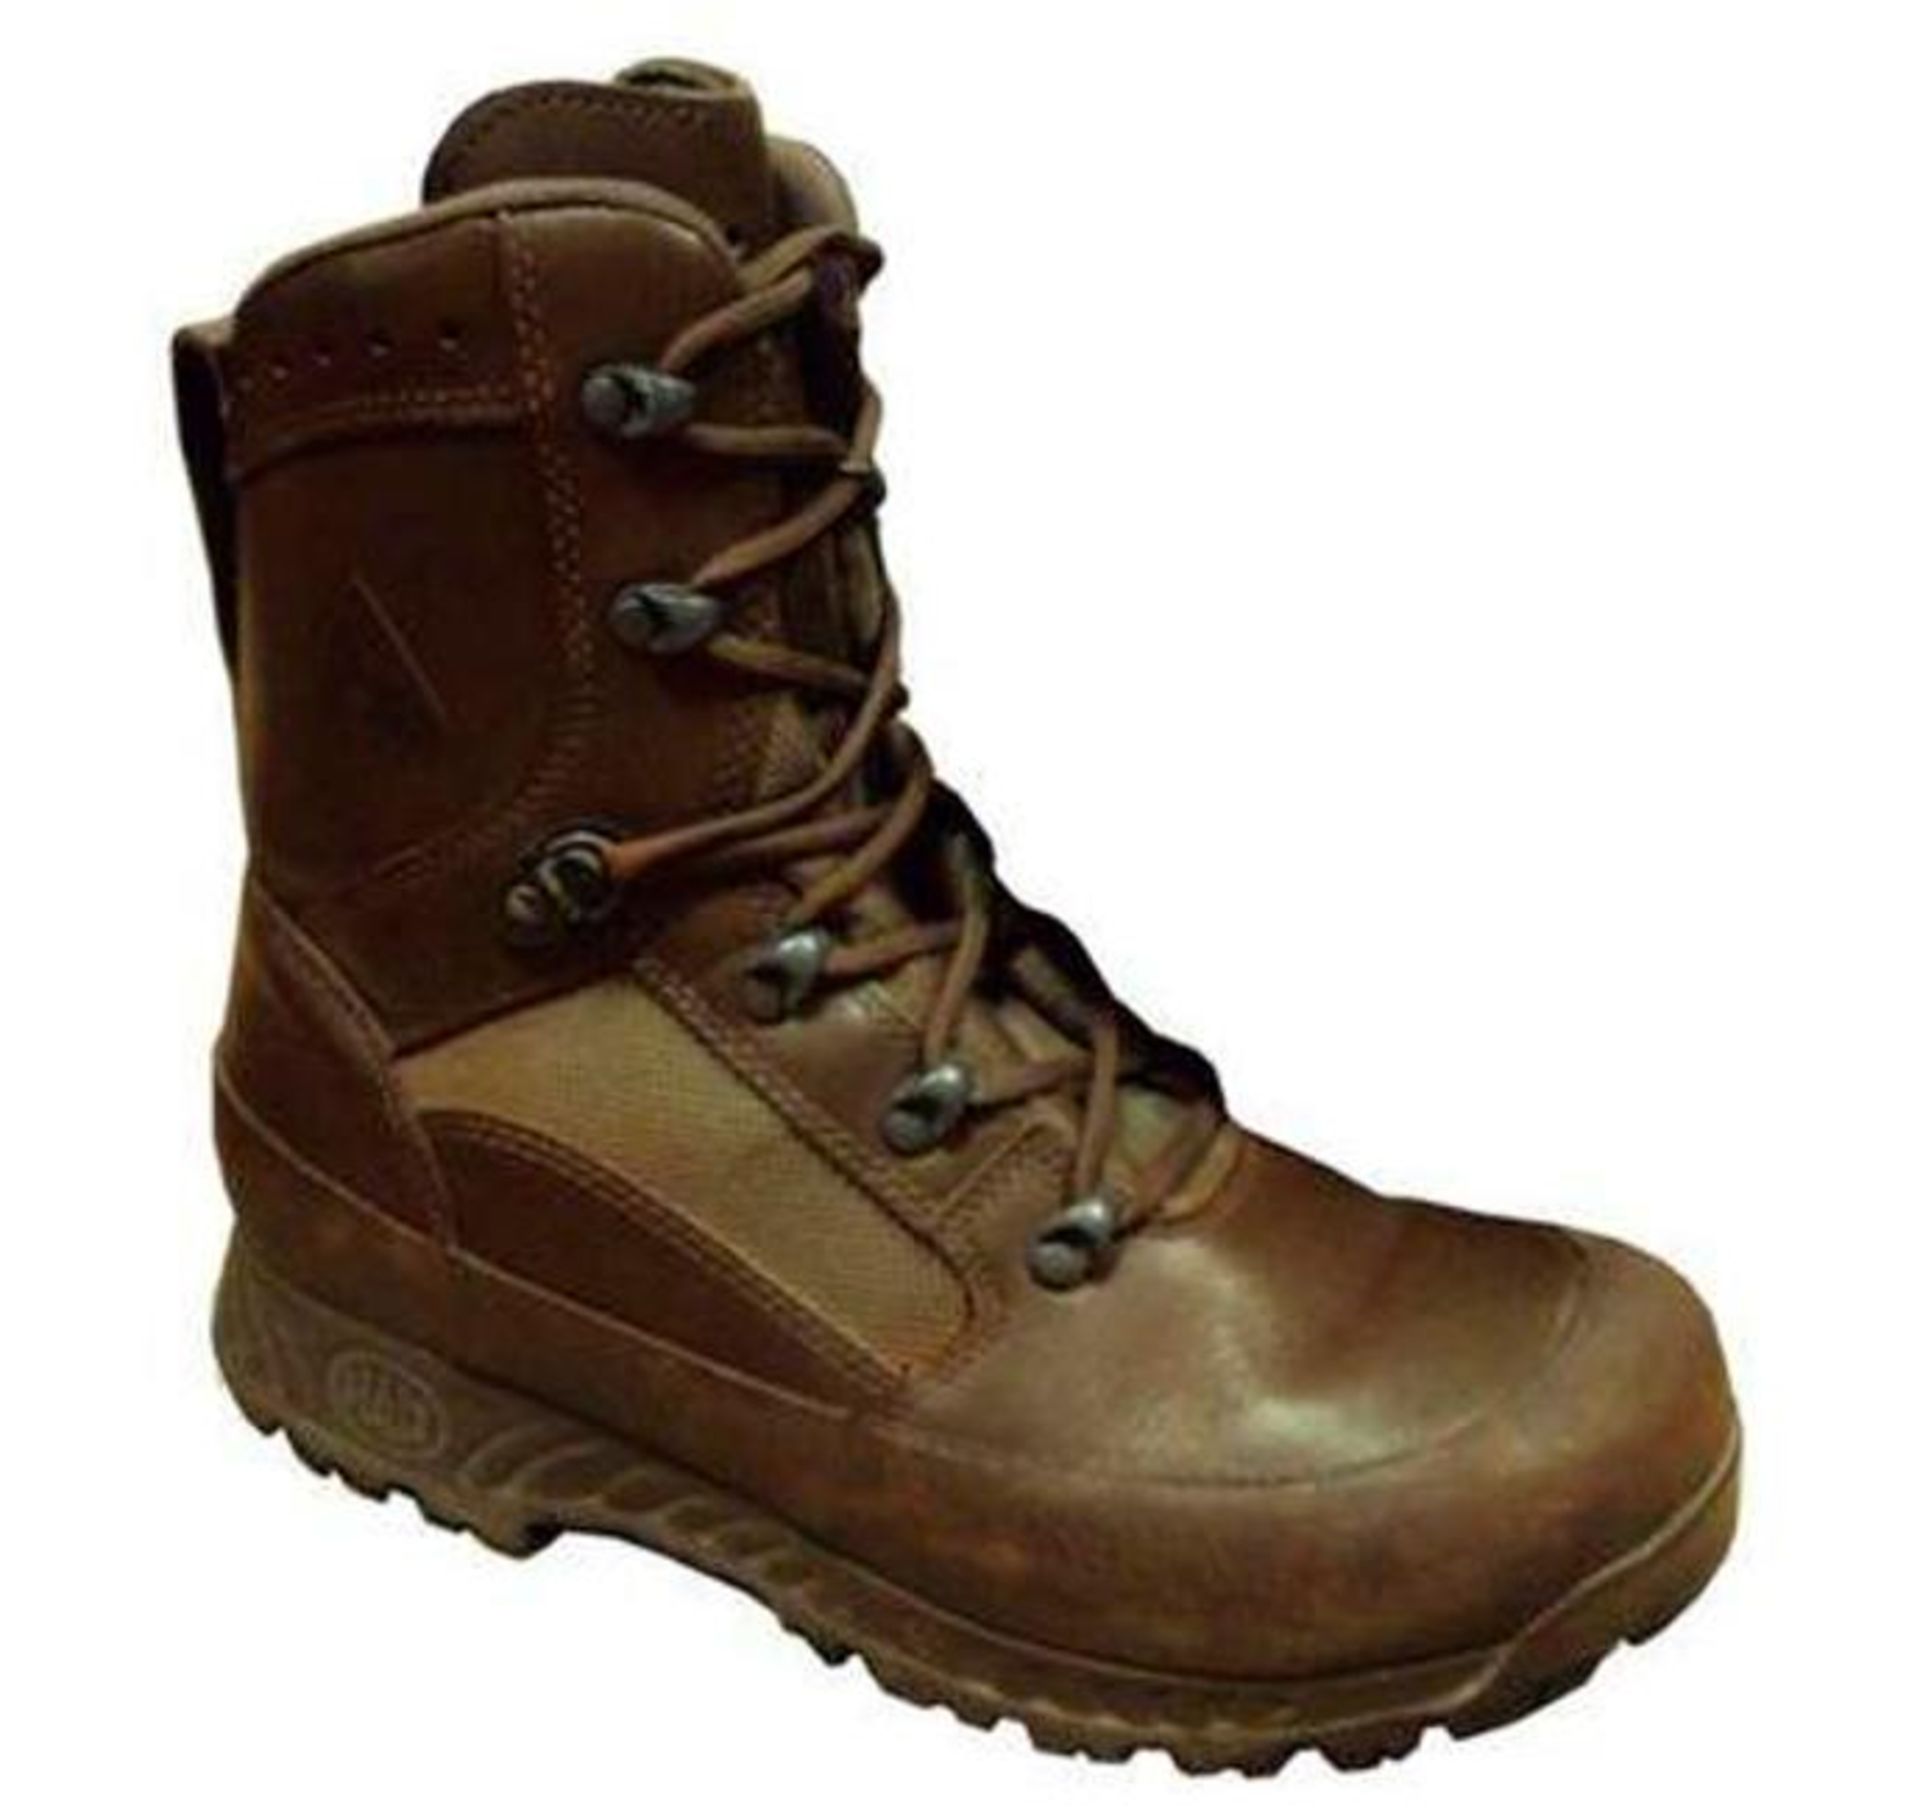 Pack of 5 - Haix Combat Boots - Mix of Sizes - Grade 1